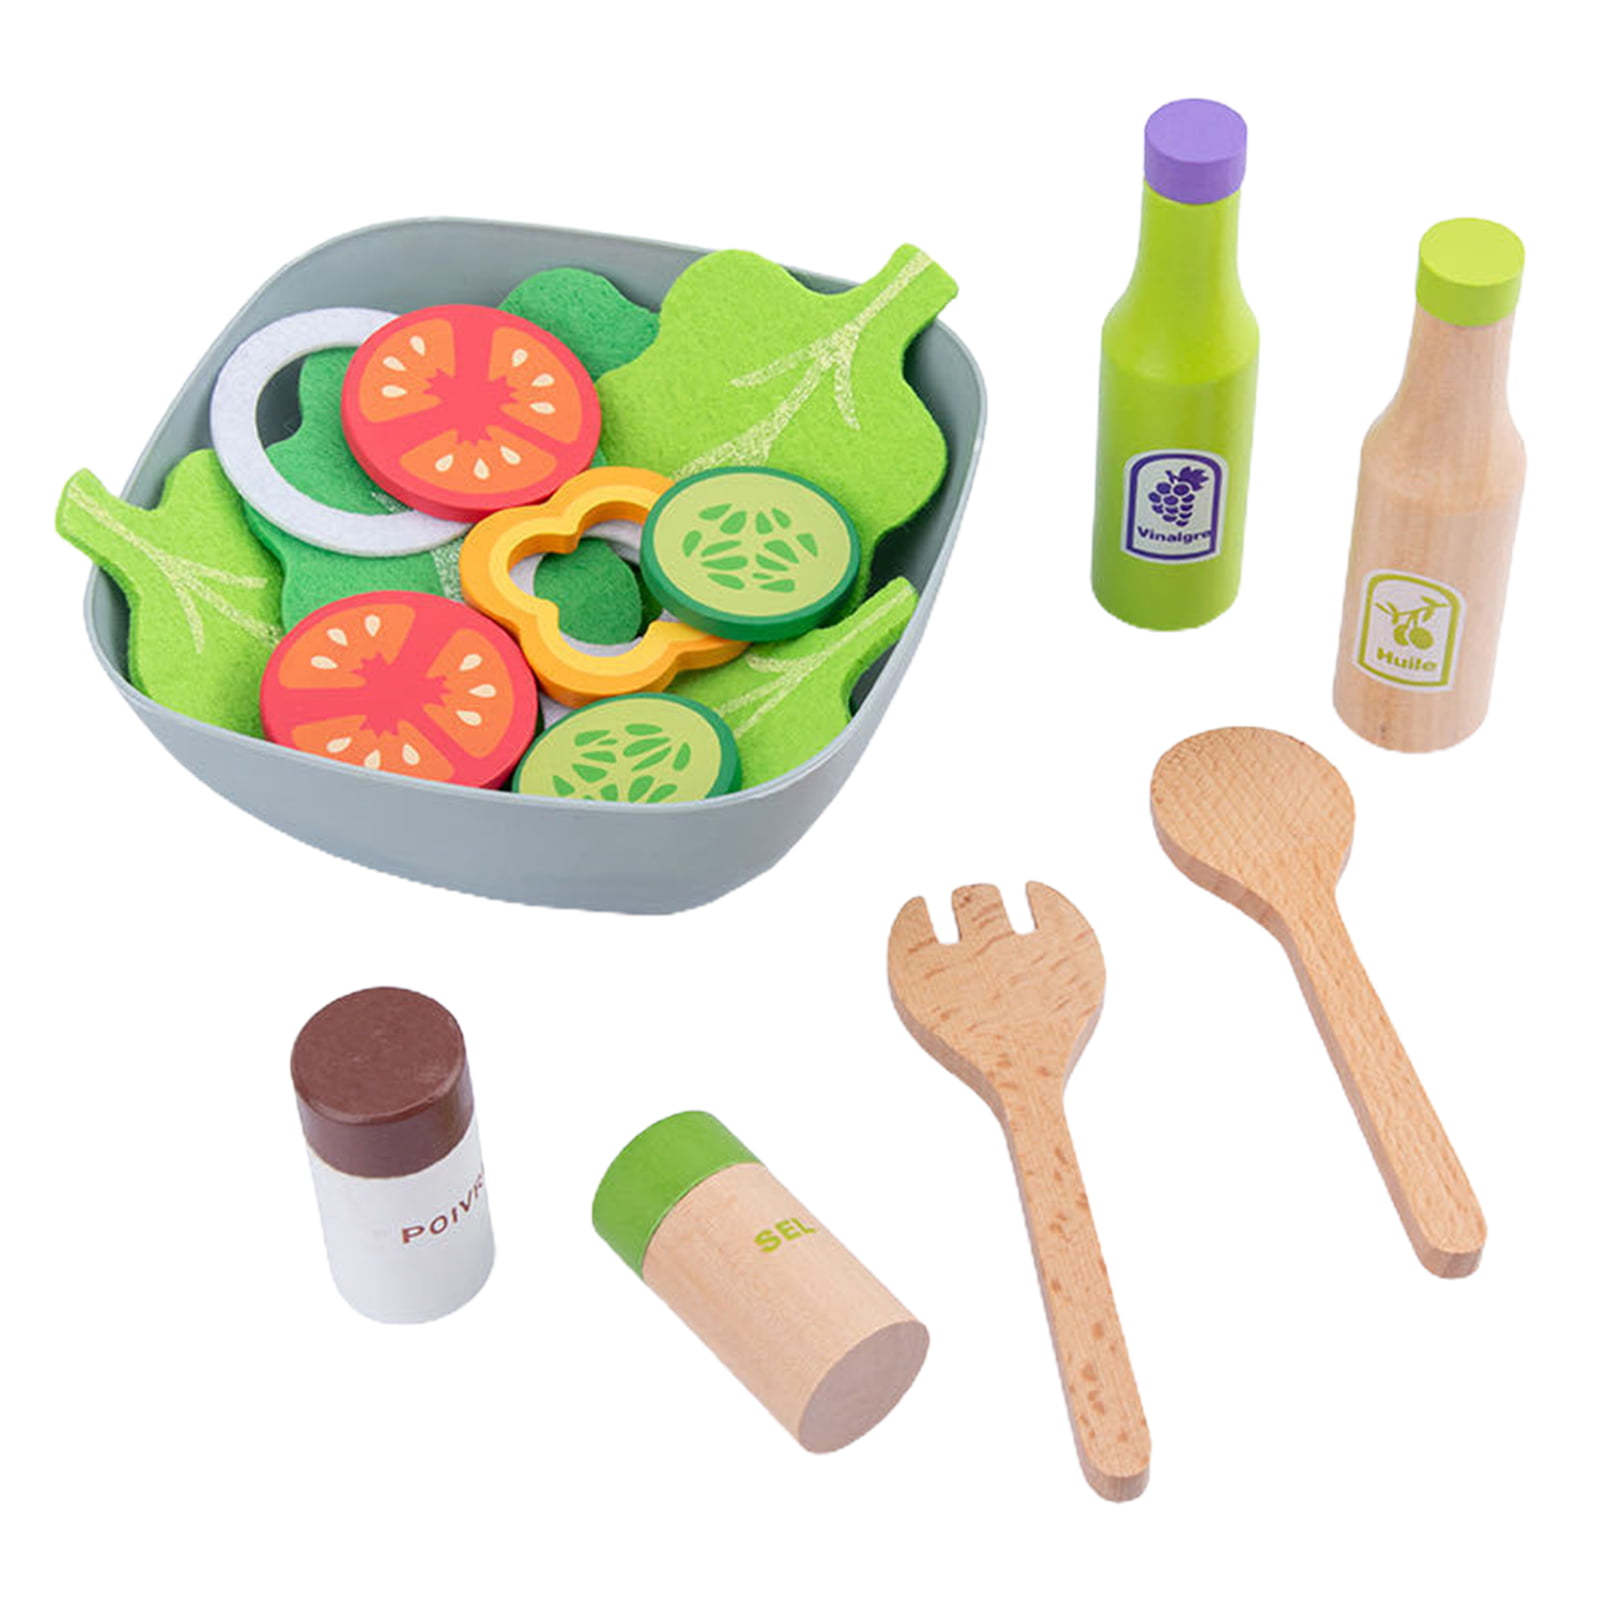 NEW 100 PICE PLAY FOOD SET IN CARRY BAG FREE SHIPPING S76 